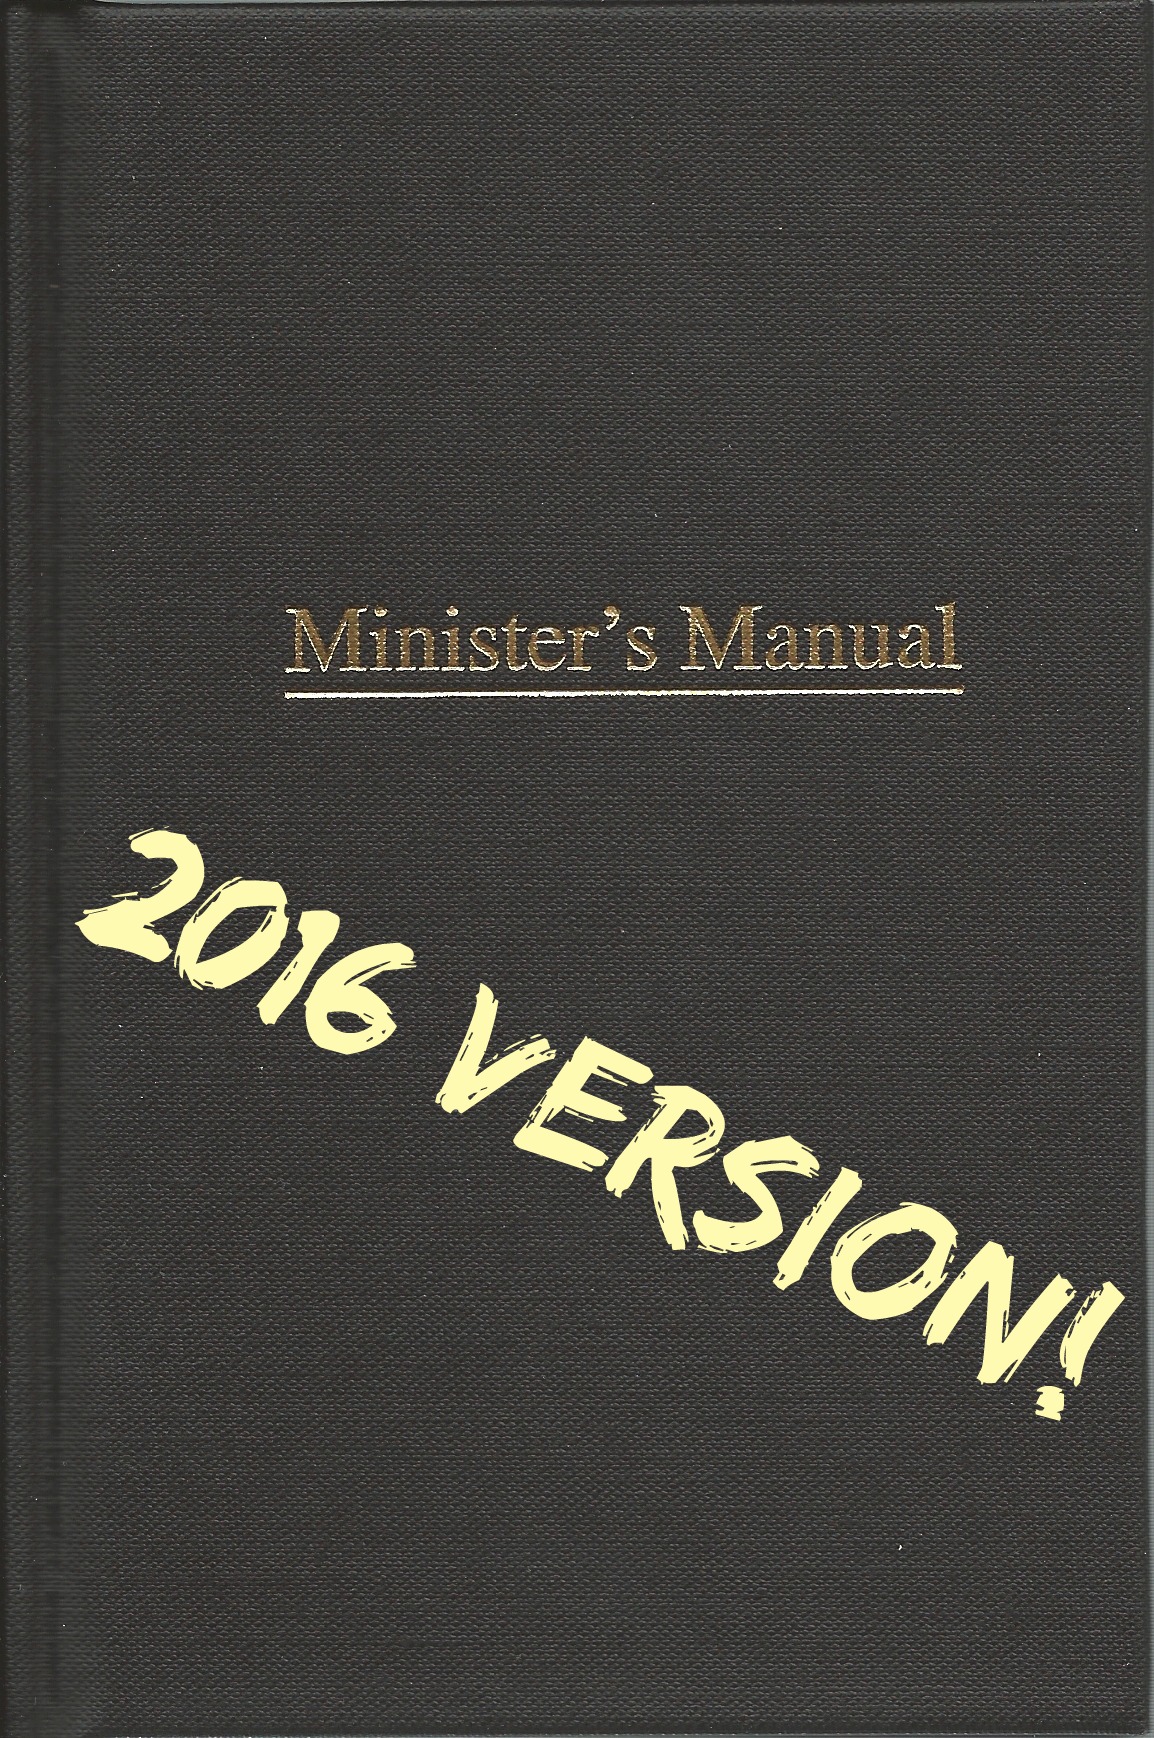 ministers manual-1-1